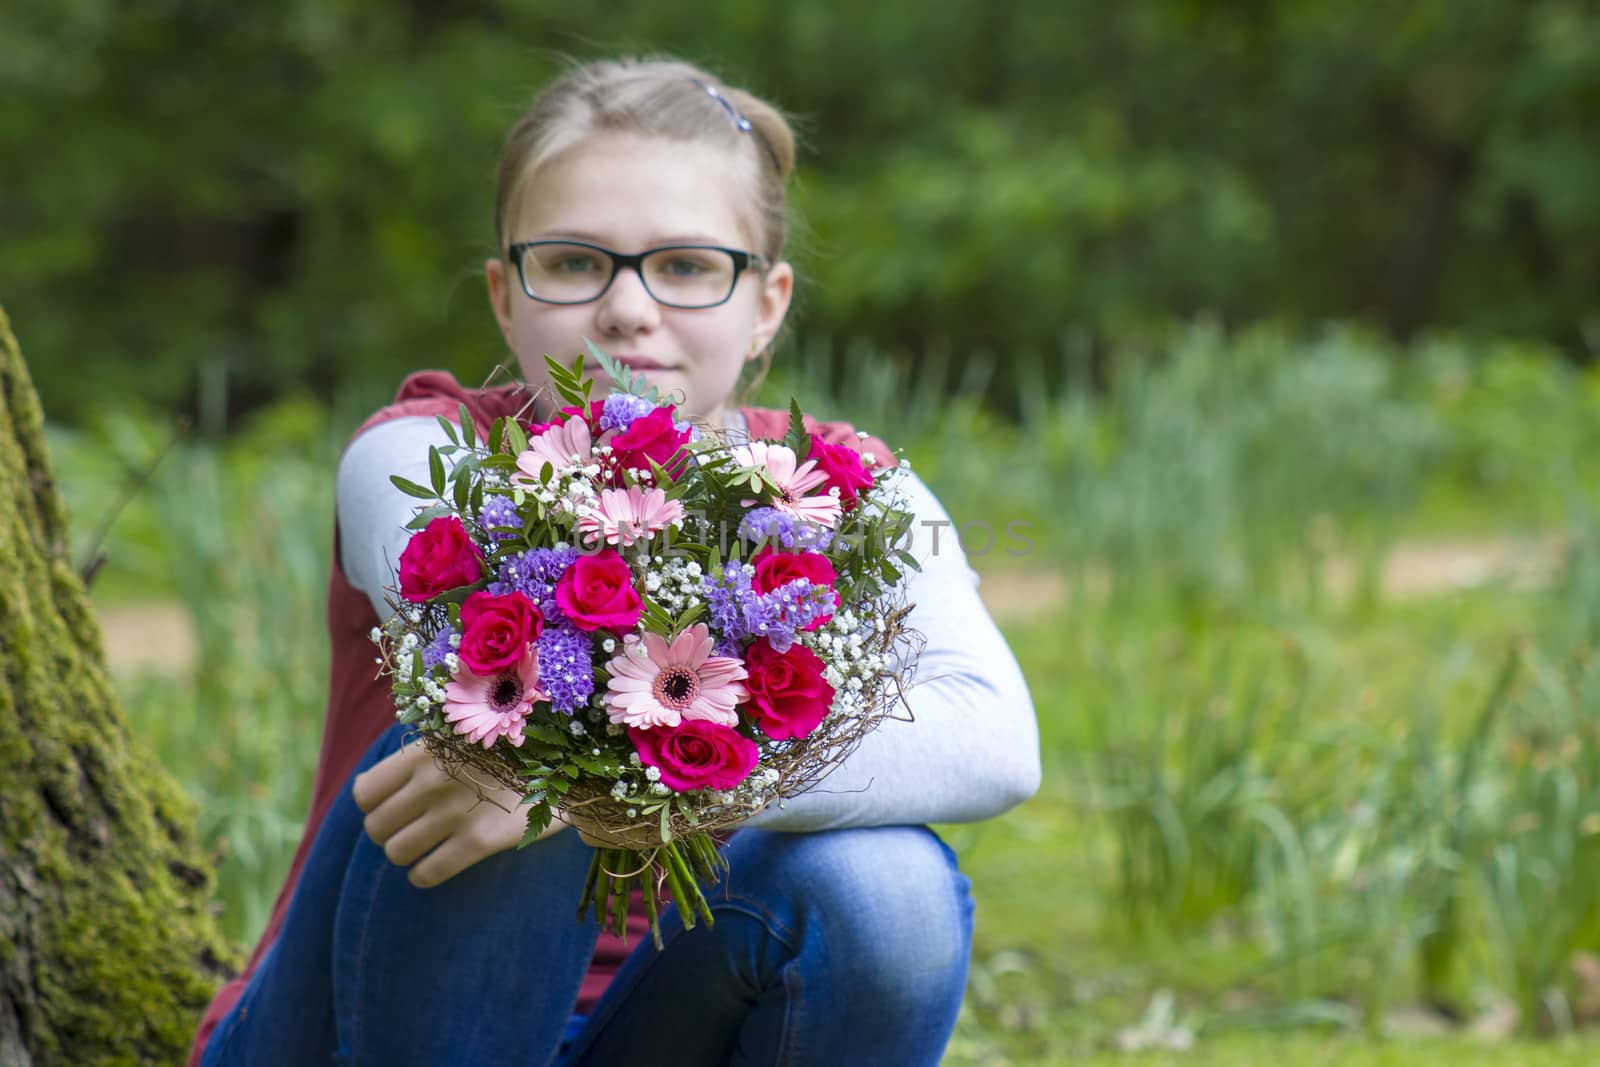 cute young girl with flowers by miradrozdowski